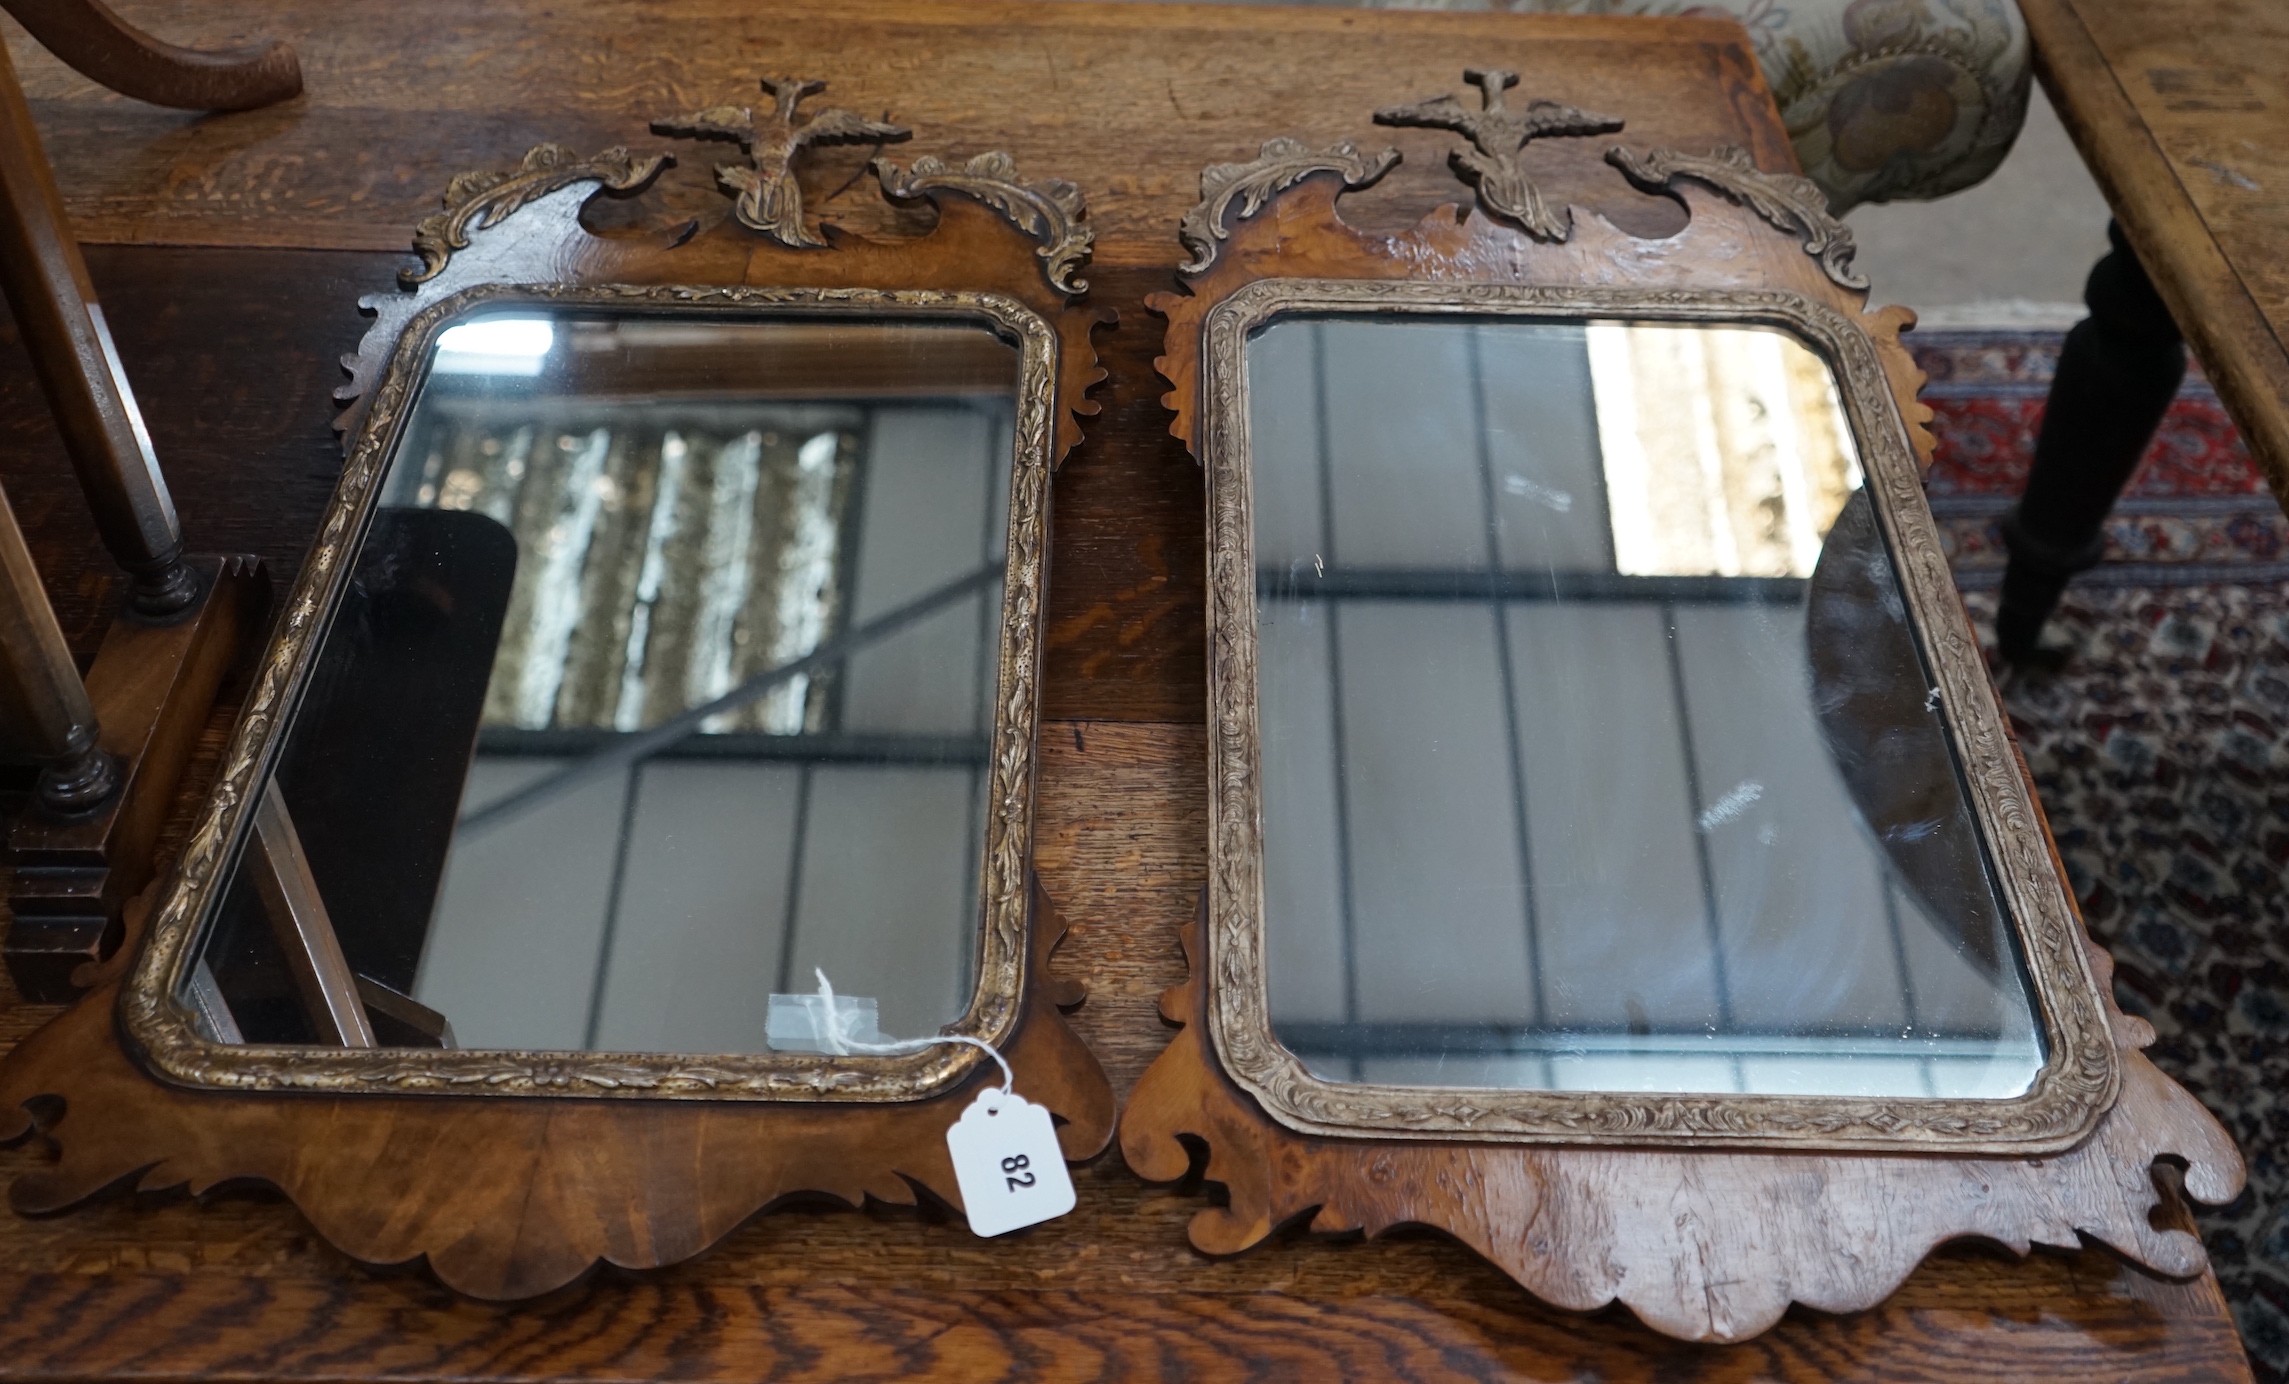 A pair of George III style yew fret cut wall mirrors, width 40cm, height 76cm**CONDITION REPORT**